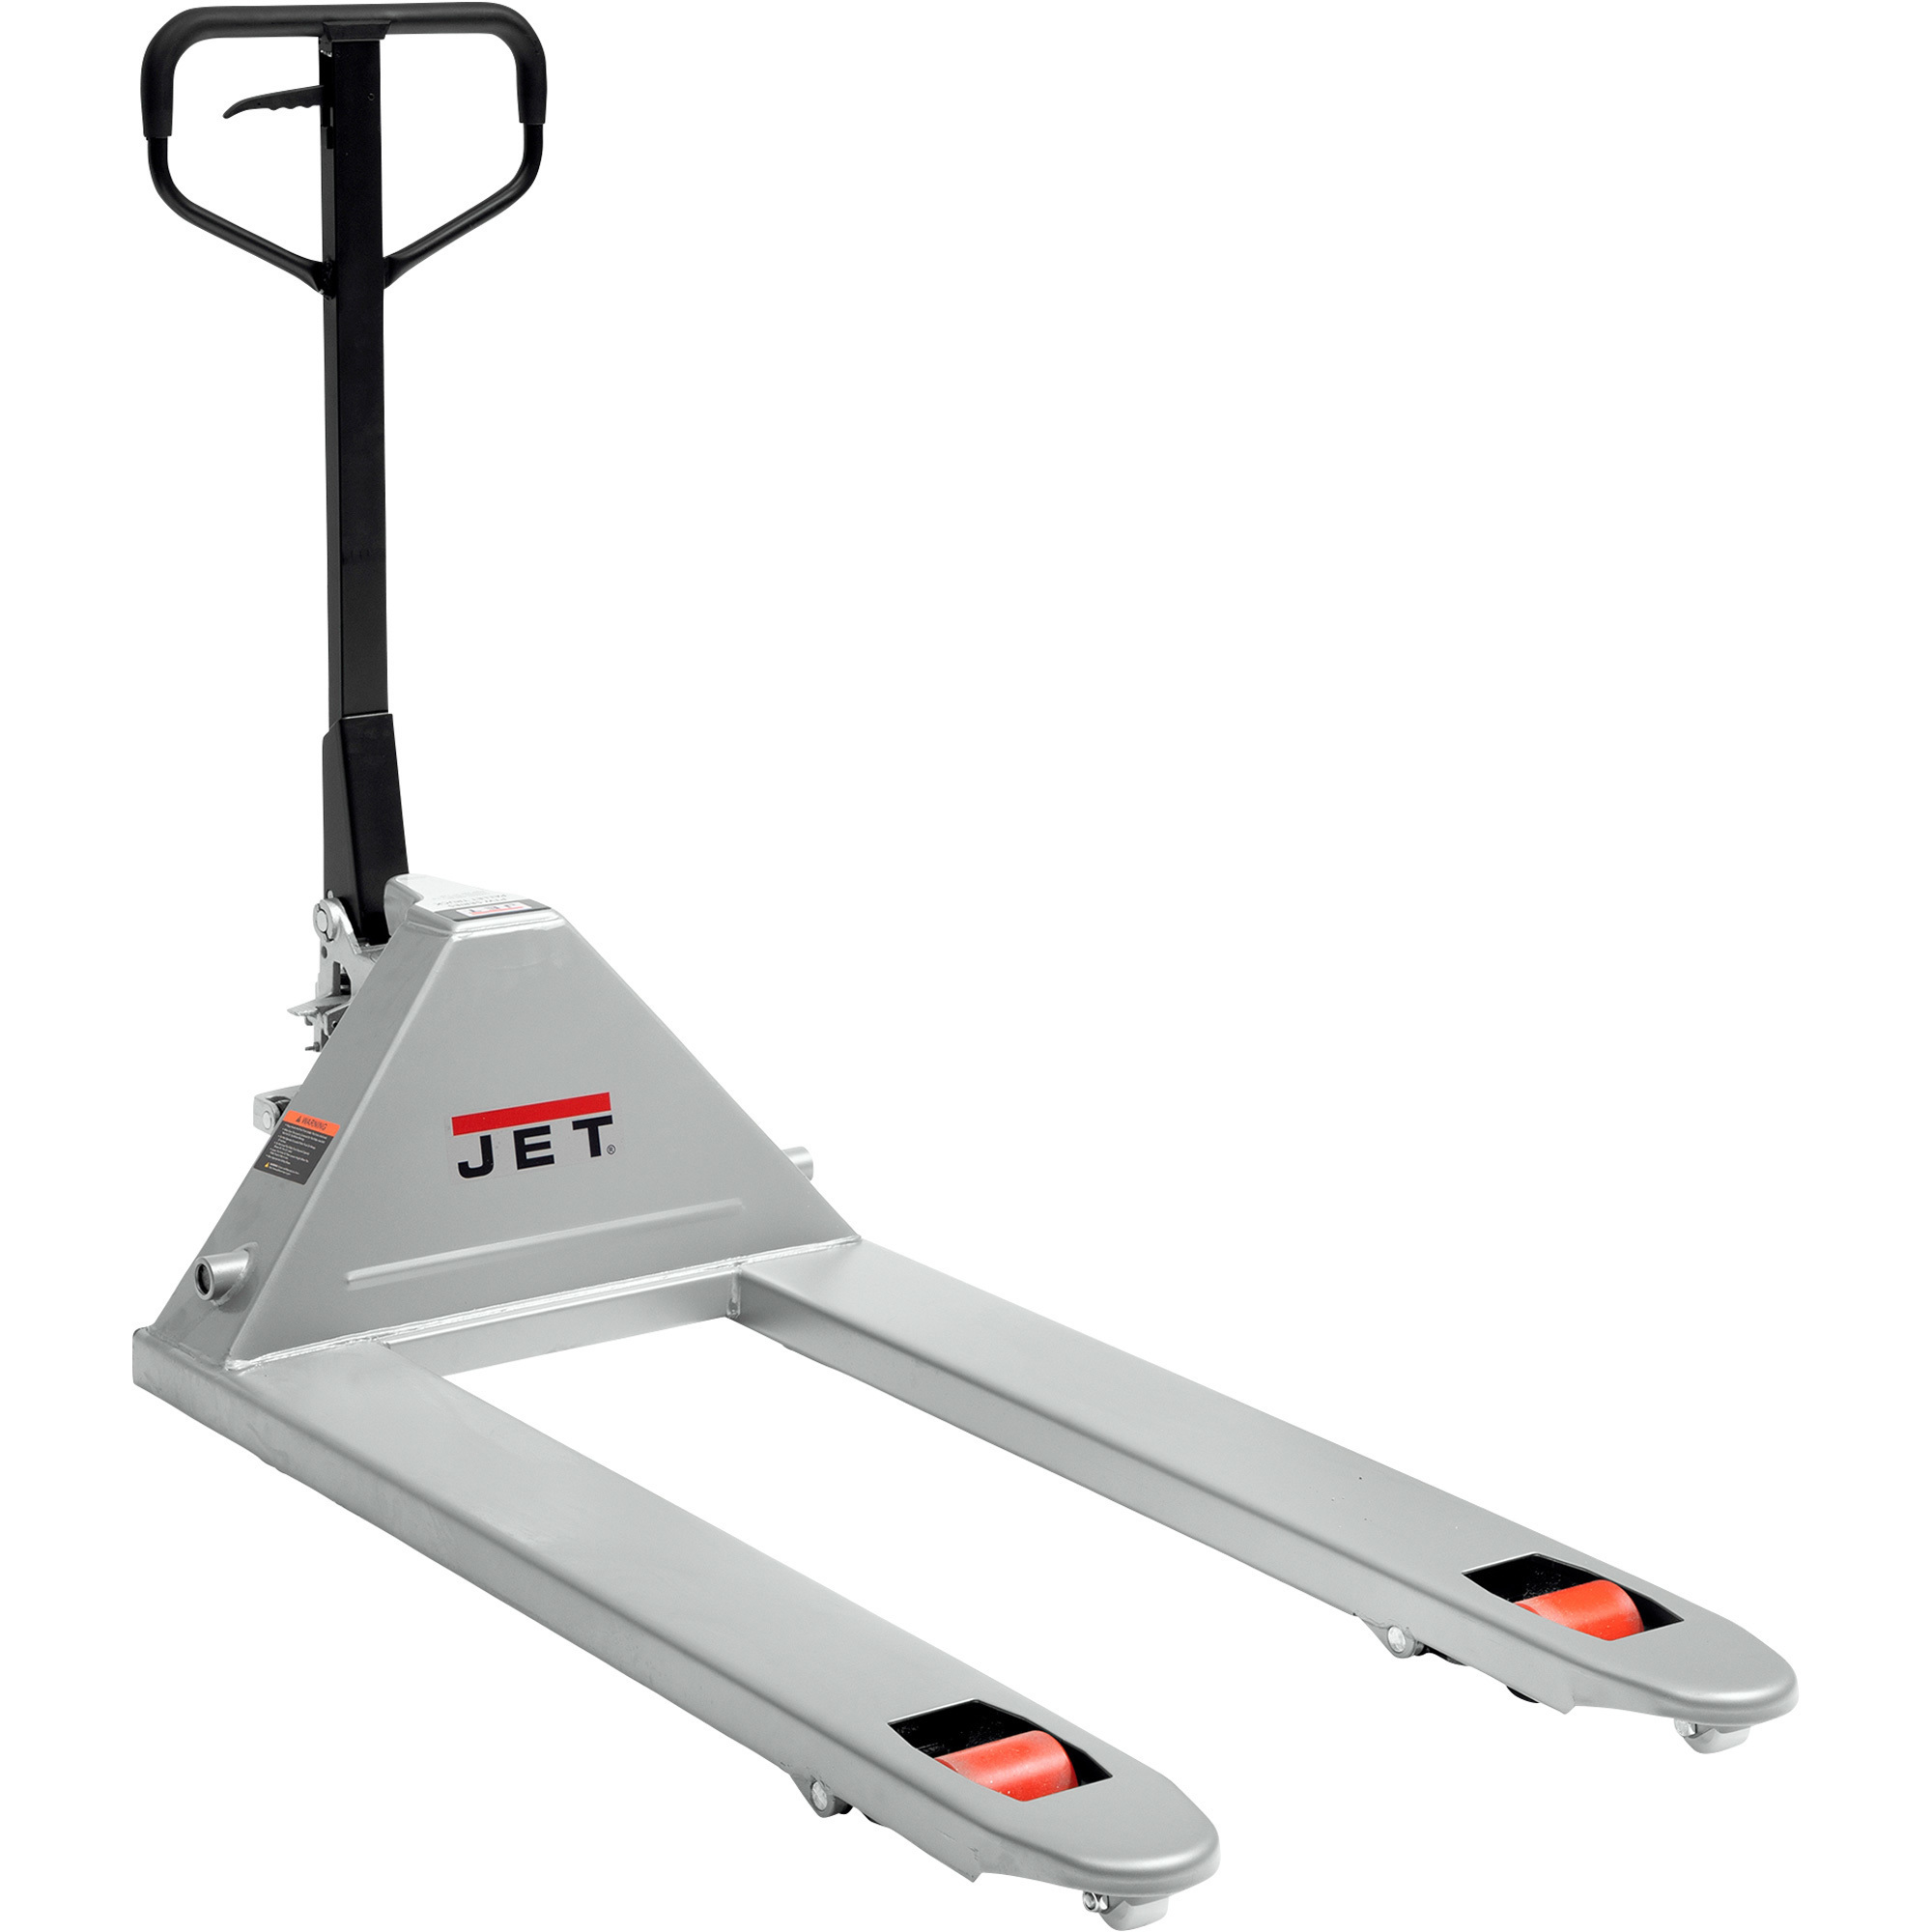 JET PTW Series Pallet Truck, 6600-Lb. Capacity, 27Inch x 48Inch x 63Inch Model PTW-2748A